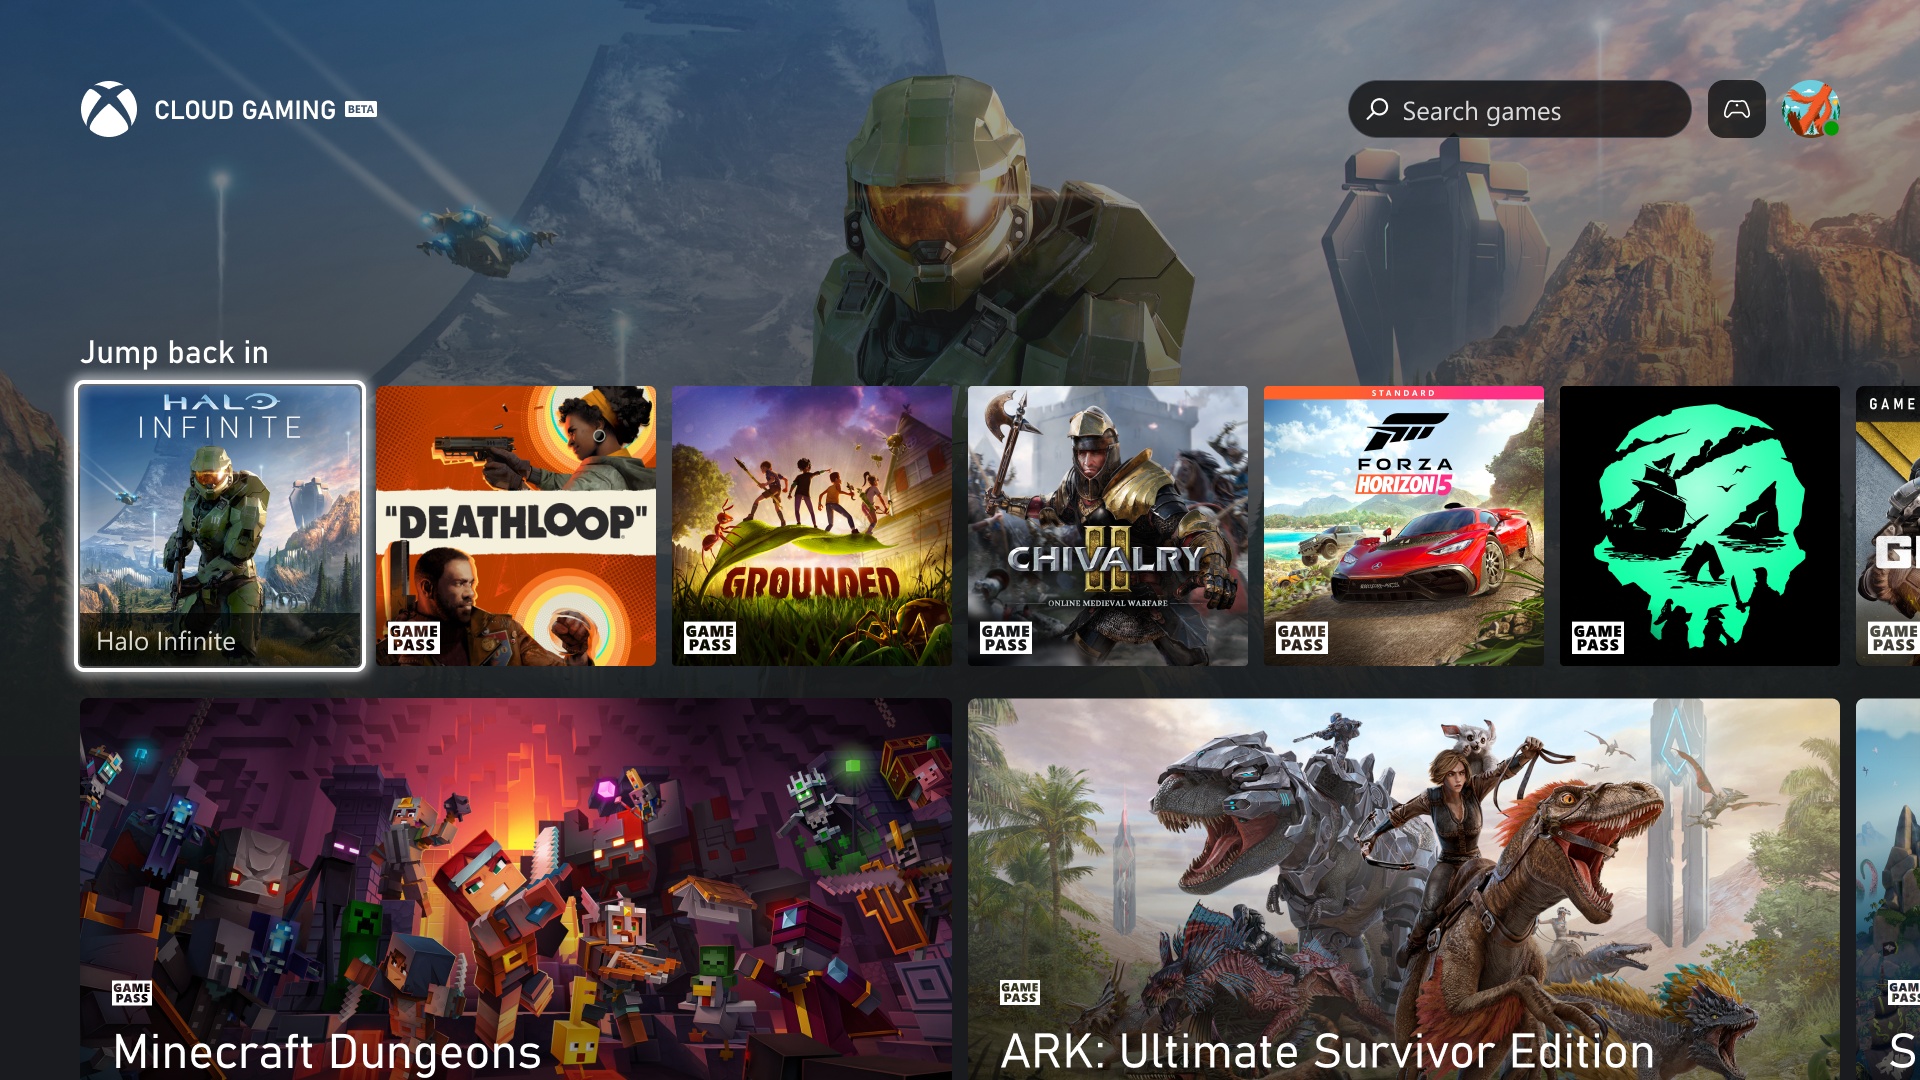 Xbox 360 can now stream from the cloud w/ Game Pass - 9to5Google